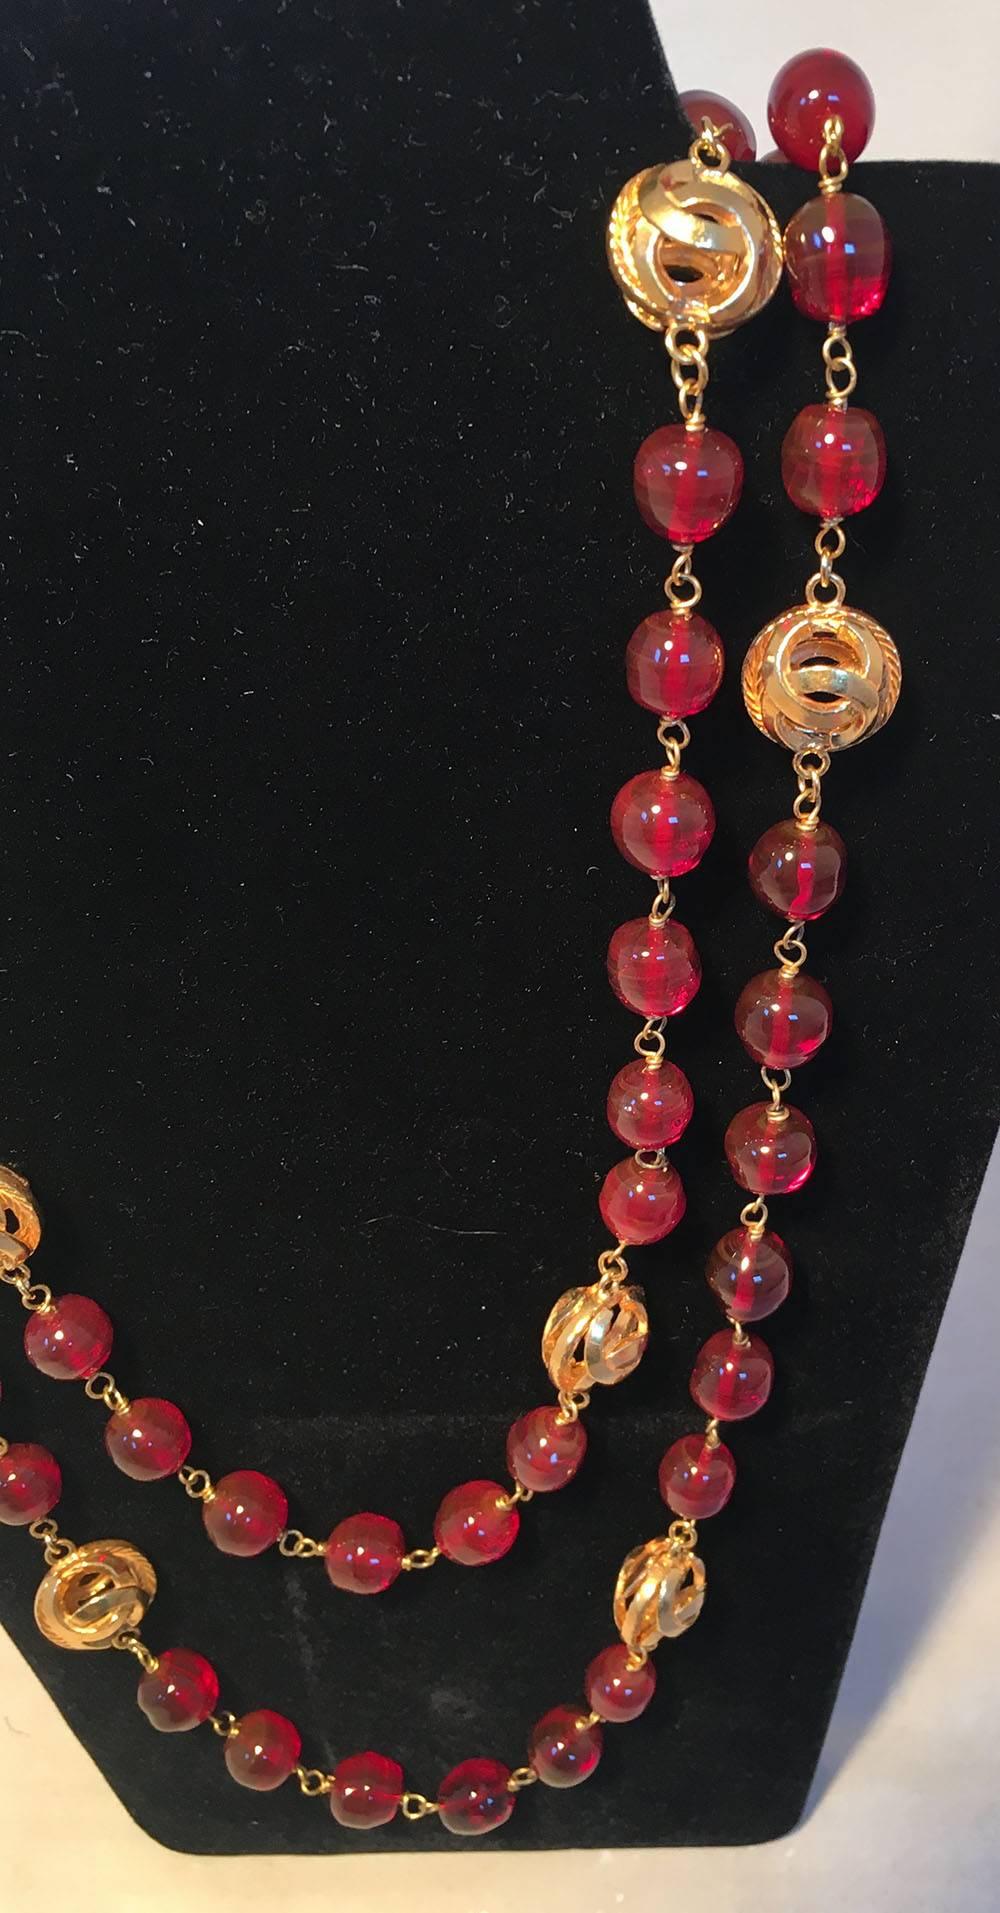 GORGEOUS Chanel Dark Red and Gold CC Beaded Long Necklace in excellent condition.  Dark red glass beads with larger gold CC logo cut out beads strung throughout. Spring ring closure. Original logo made in France charm attached. No scuffs, scratches,